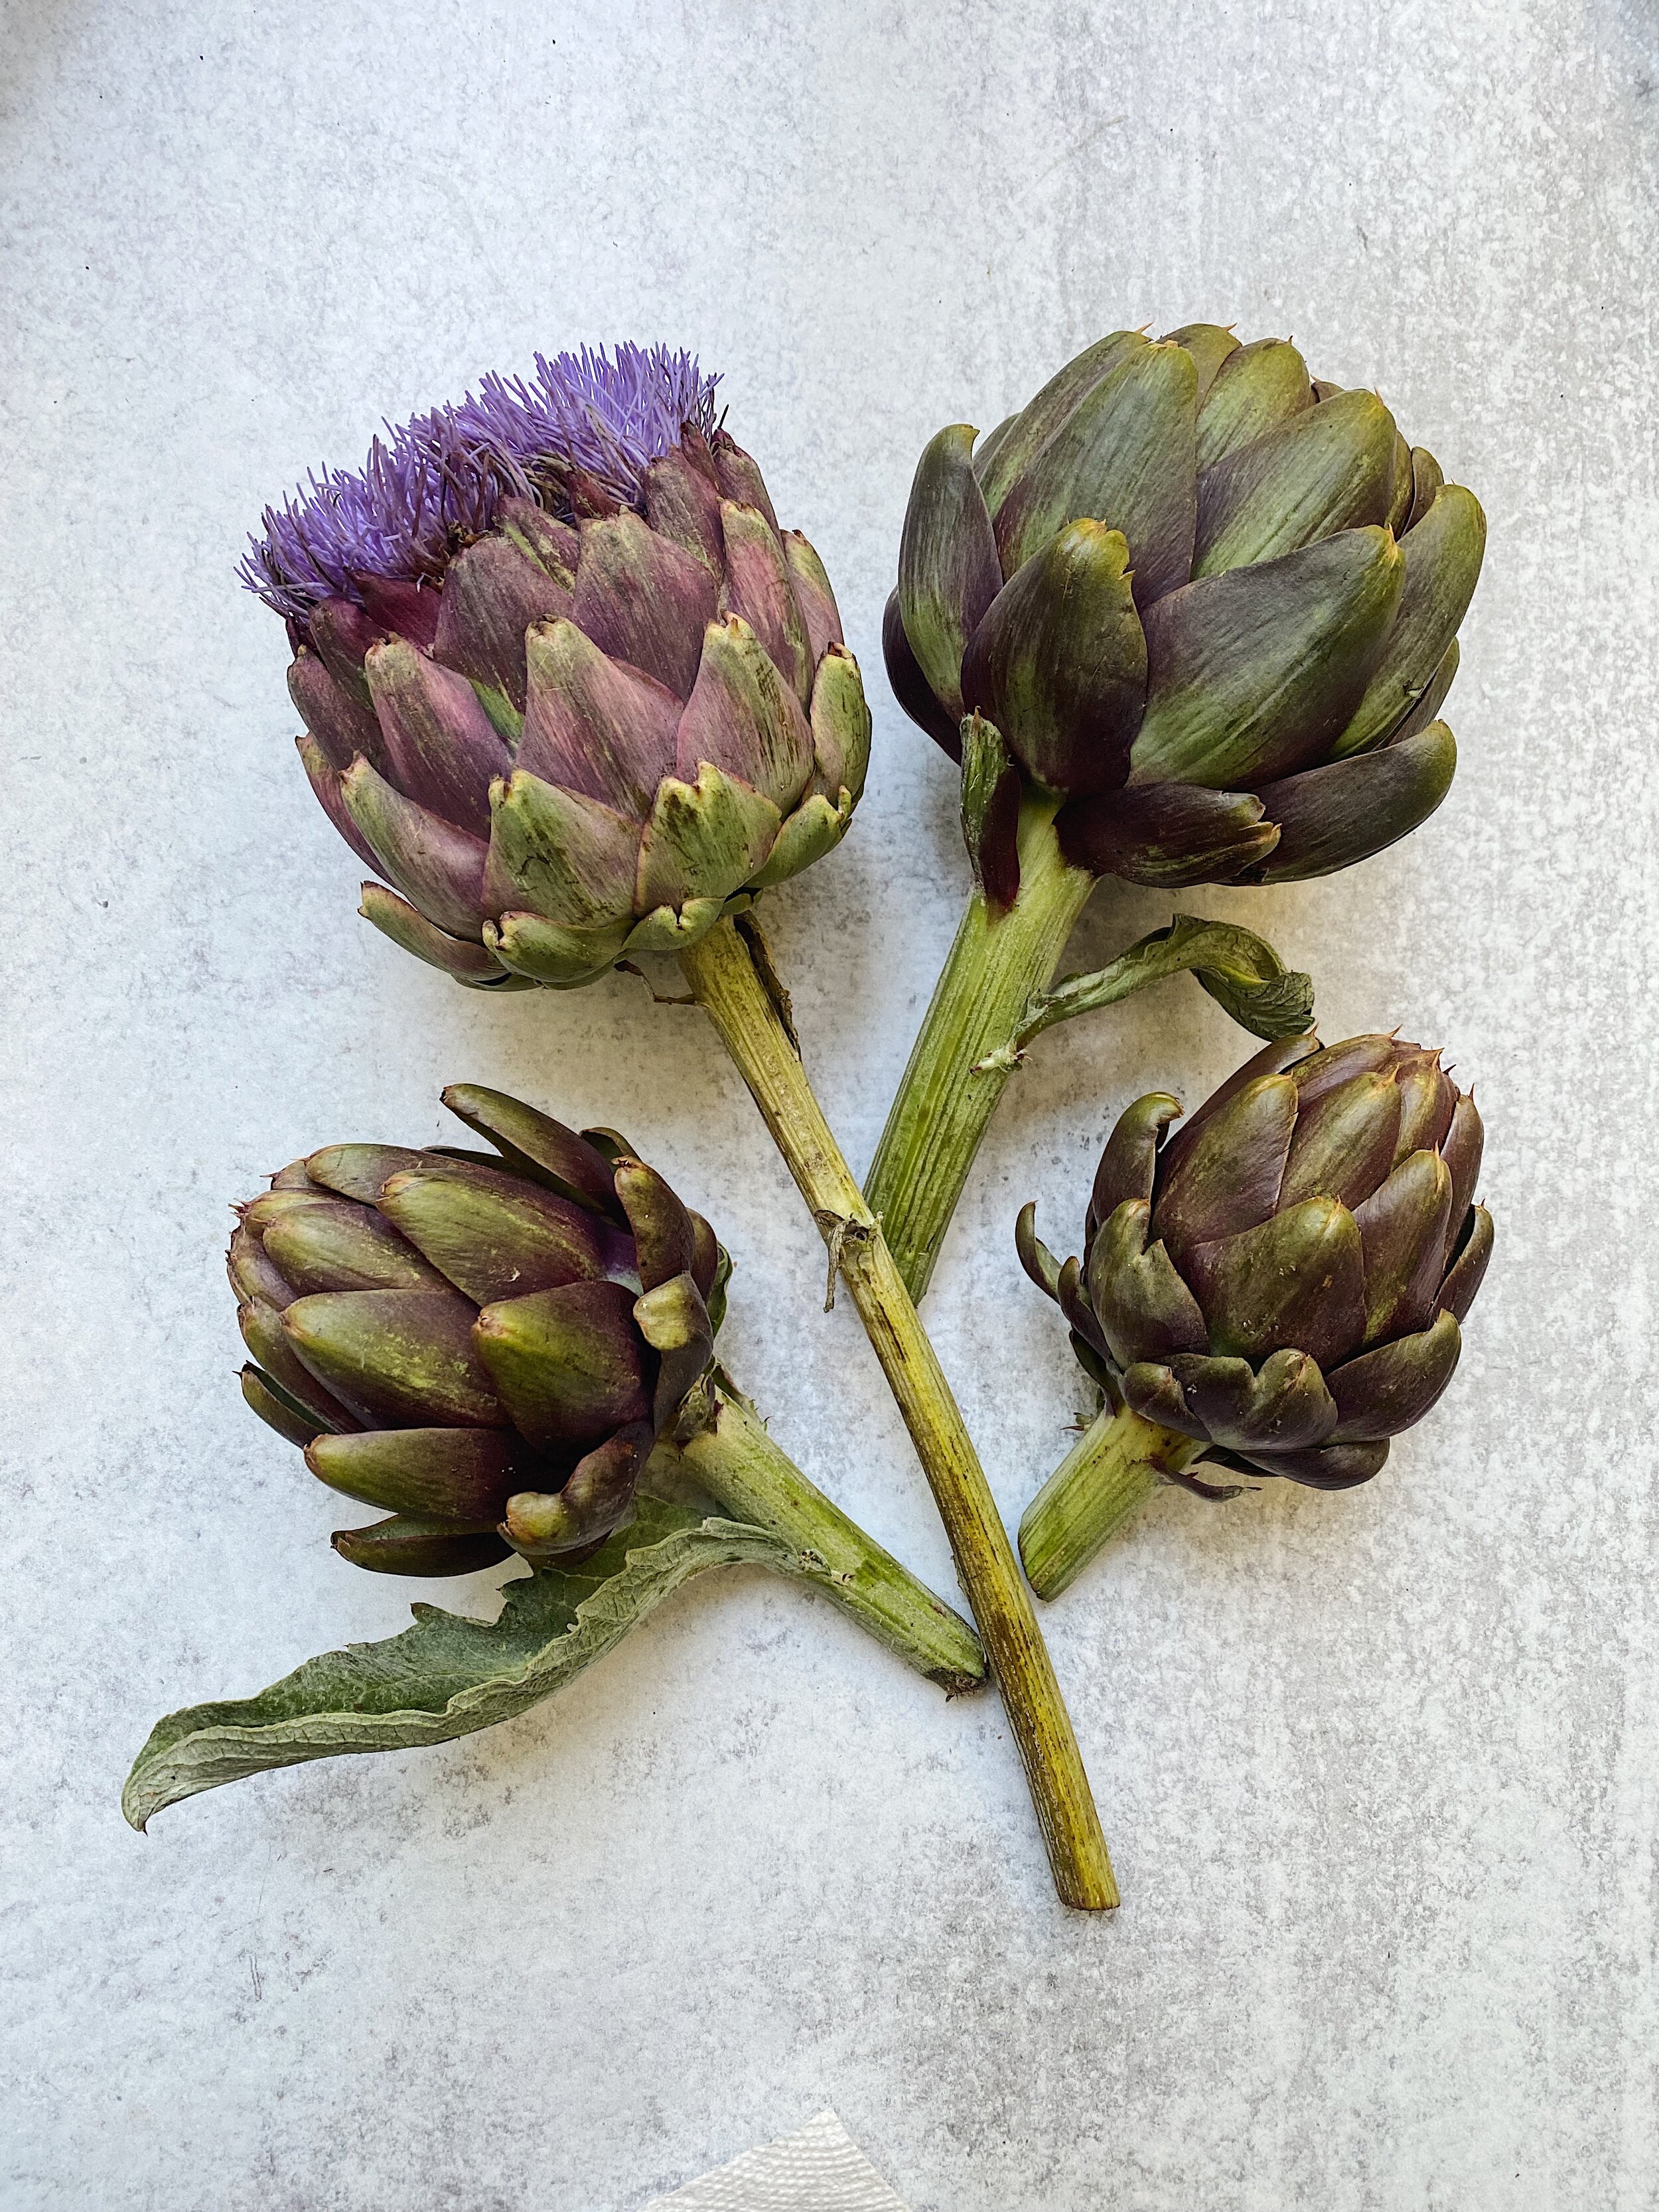 Artichokes and Flower